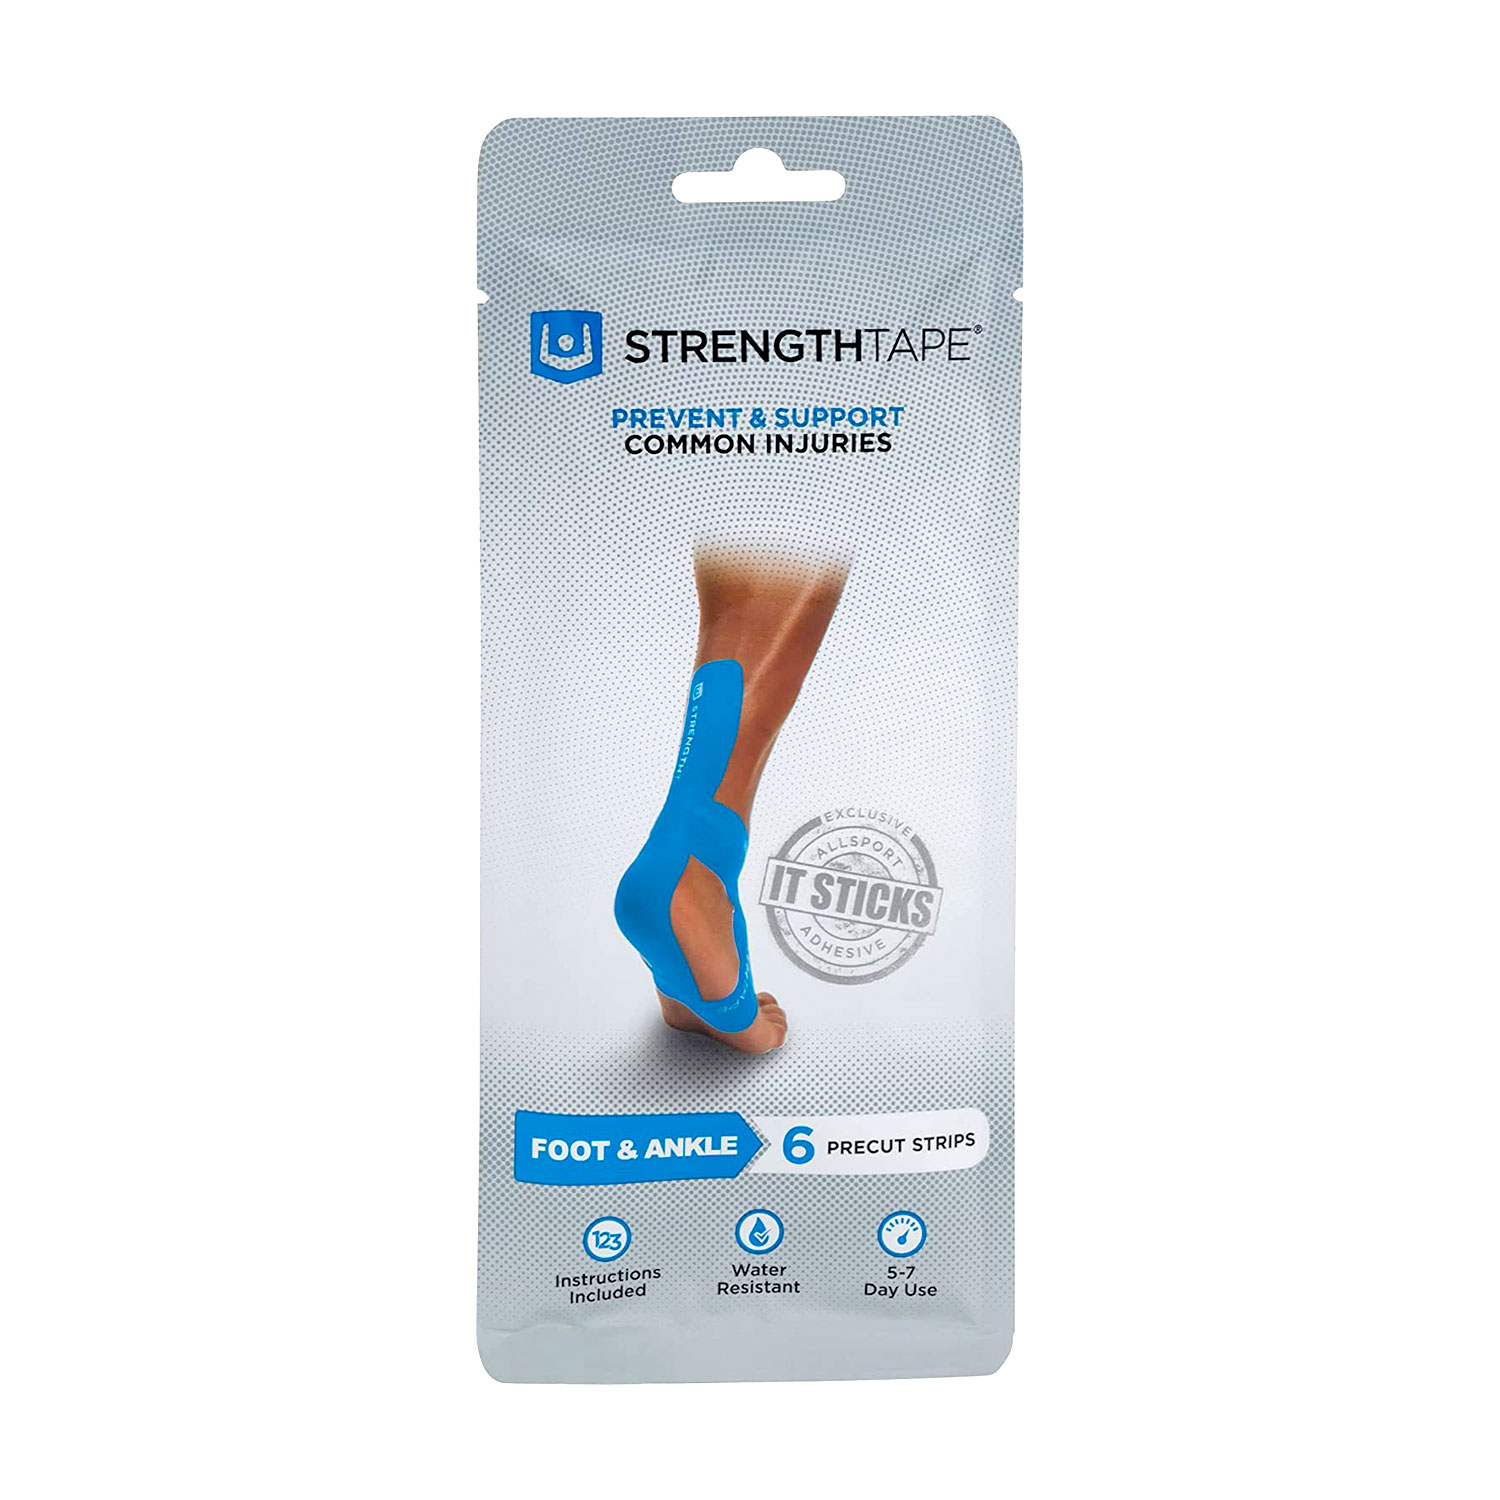 Ironman Strength Tape - Foot & Ankle